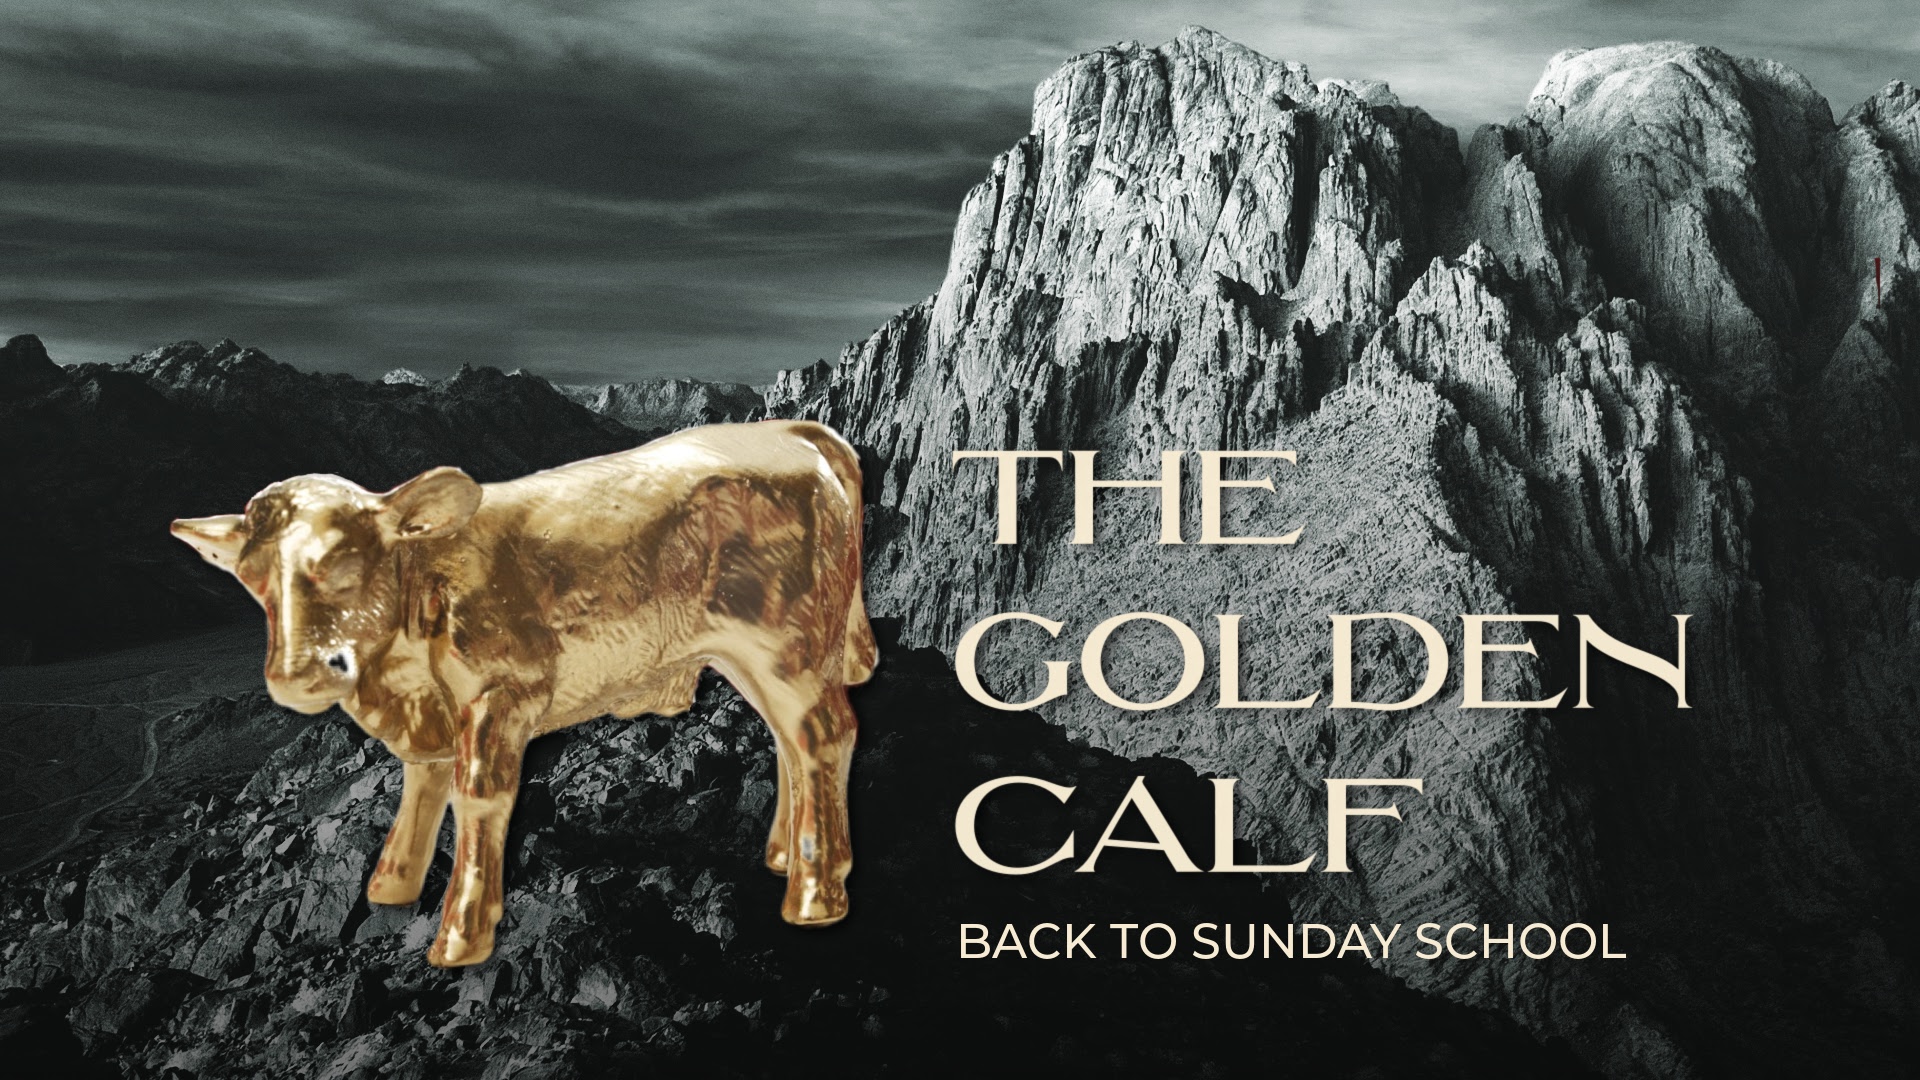 The Israelites wanted God now. But trying to control and manufacture God’s presence rarely works out well. Go “back to Sunday School” with a classic story of impatience, idolatry, and the mystery of God.